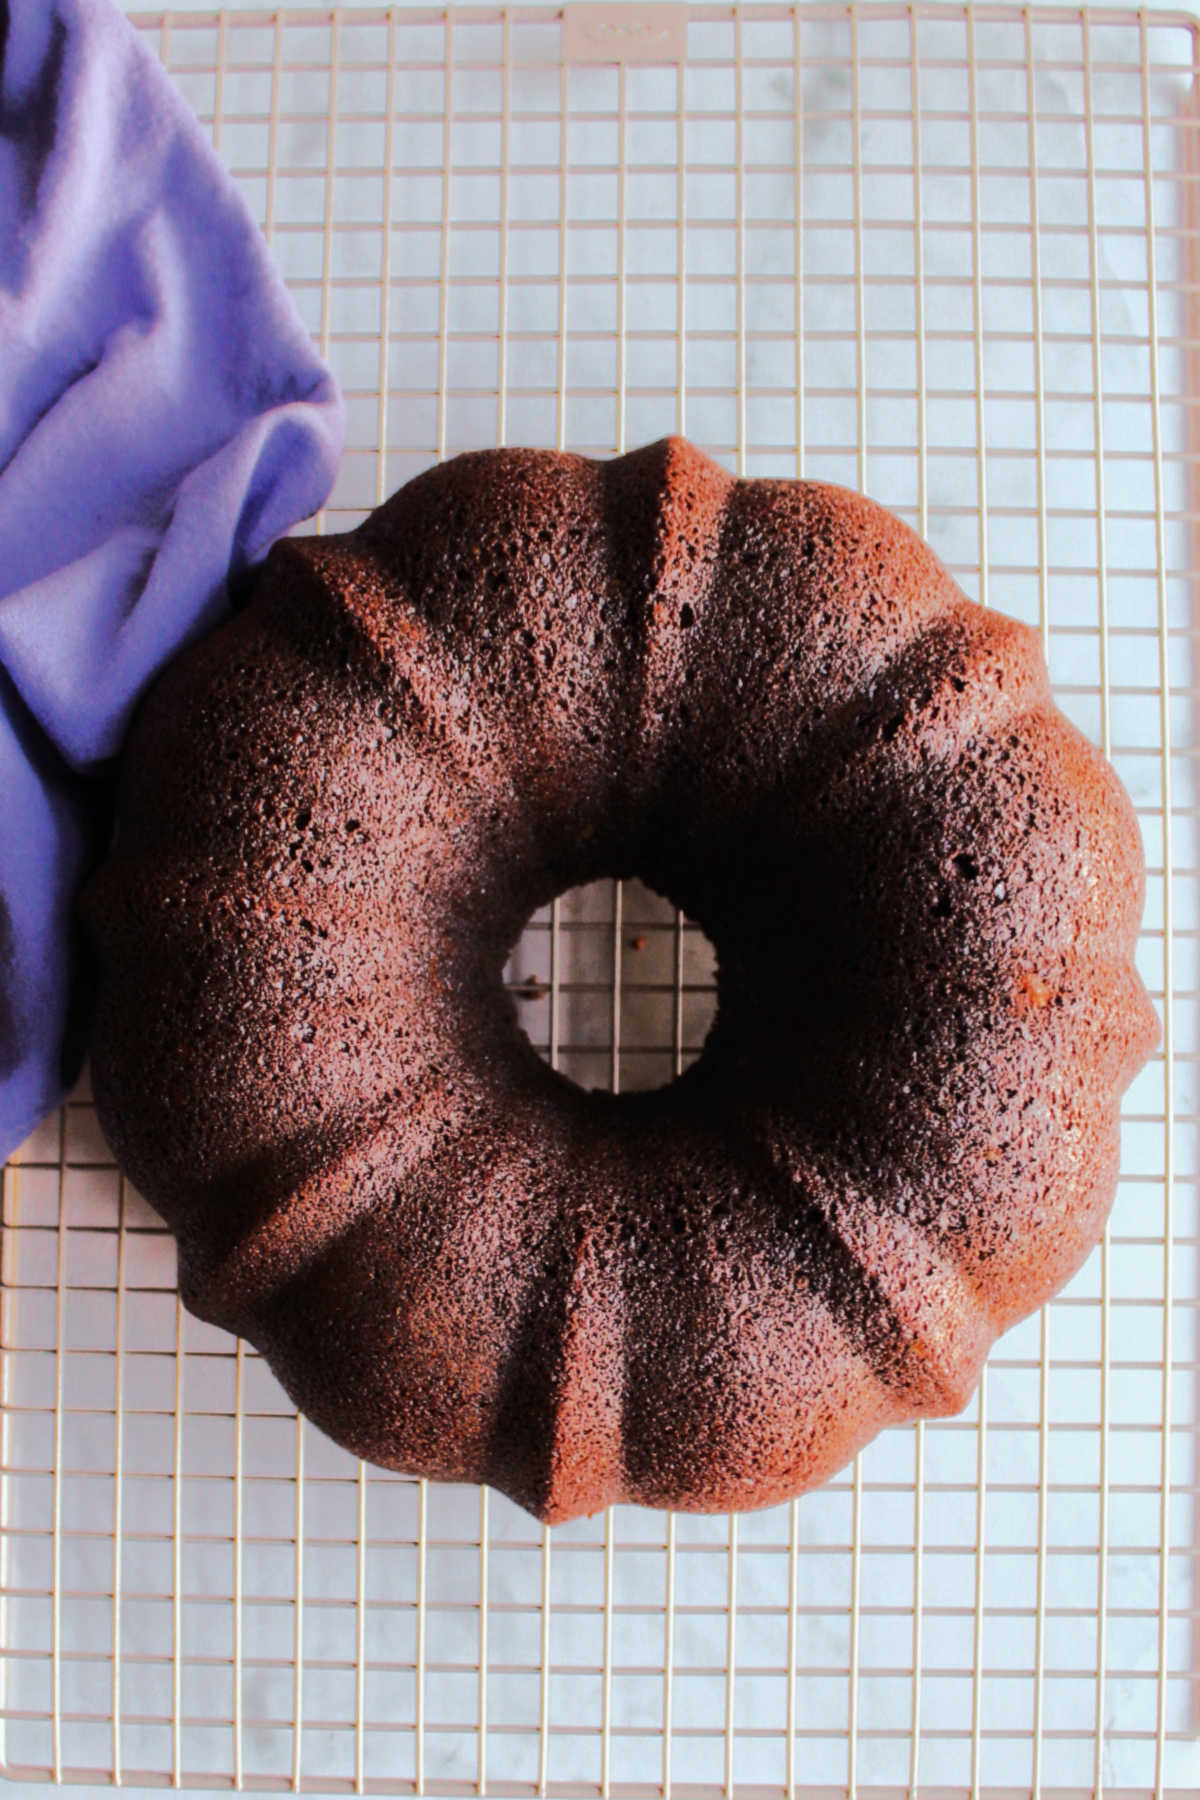 Chocolate bundt cake cooling on wire rack.